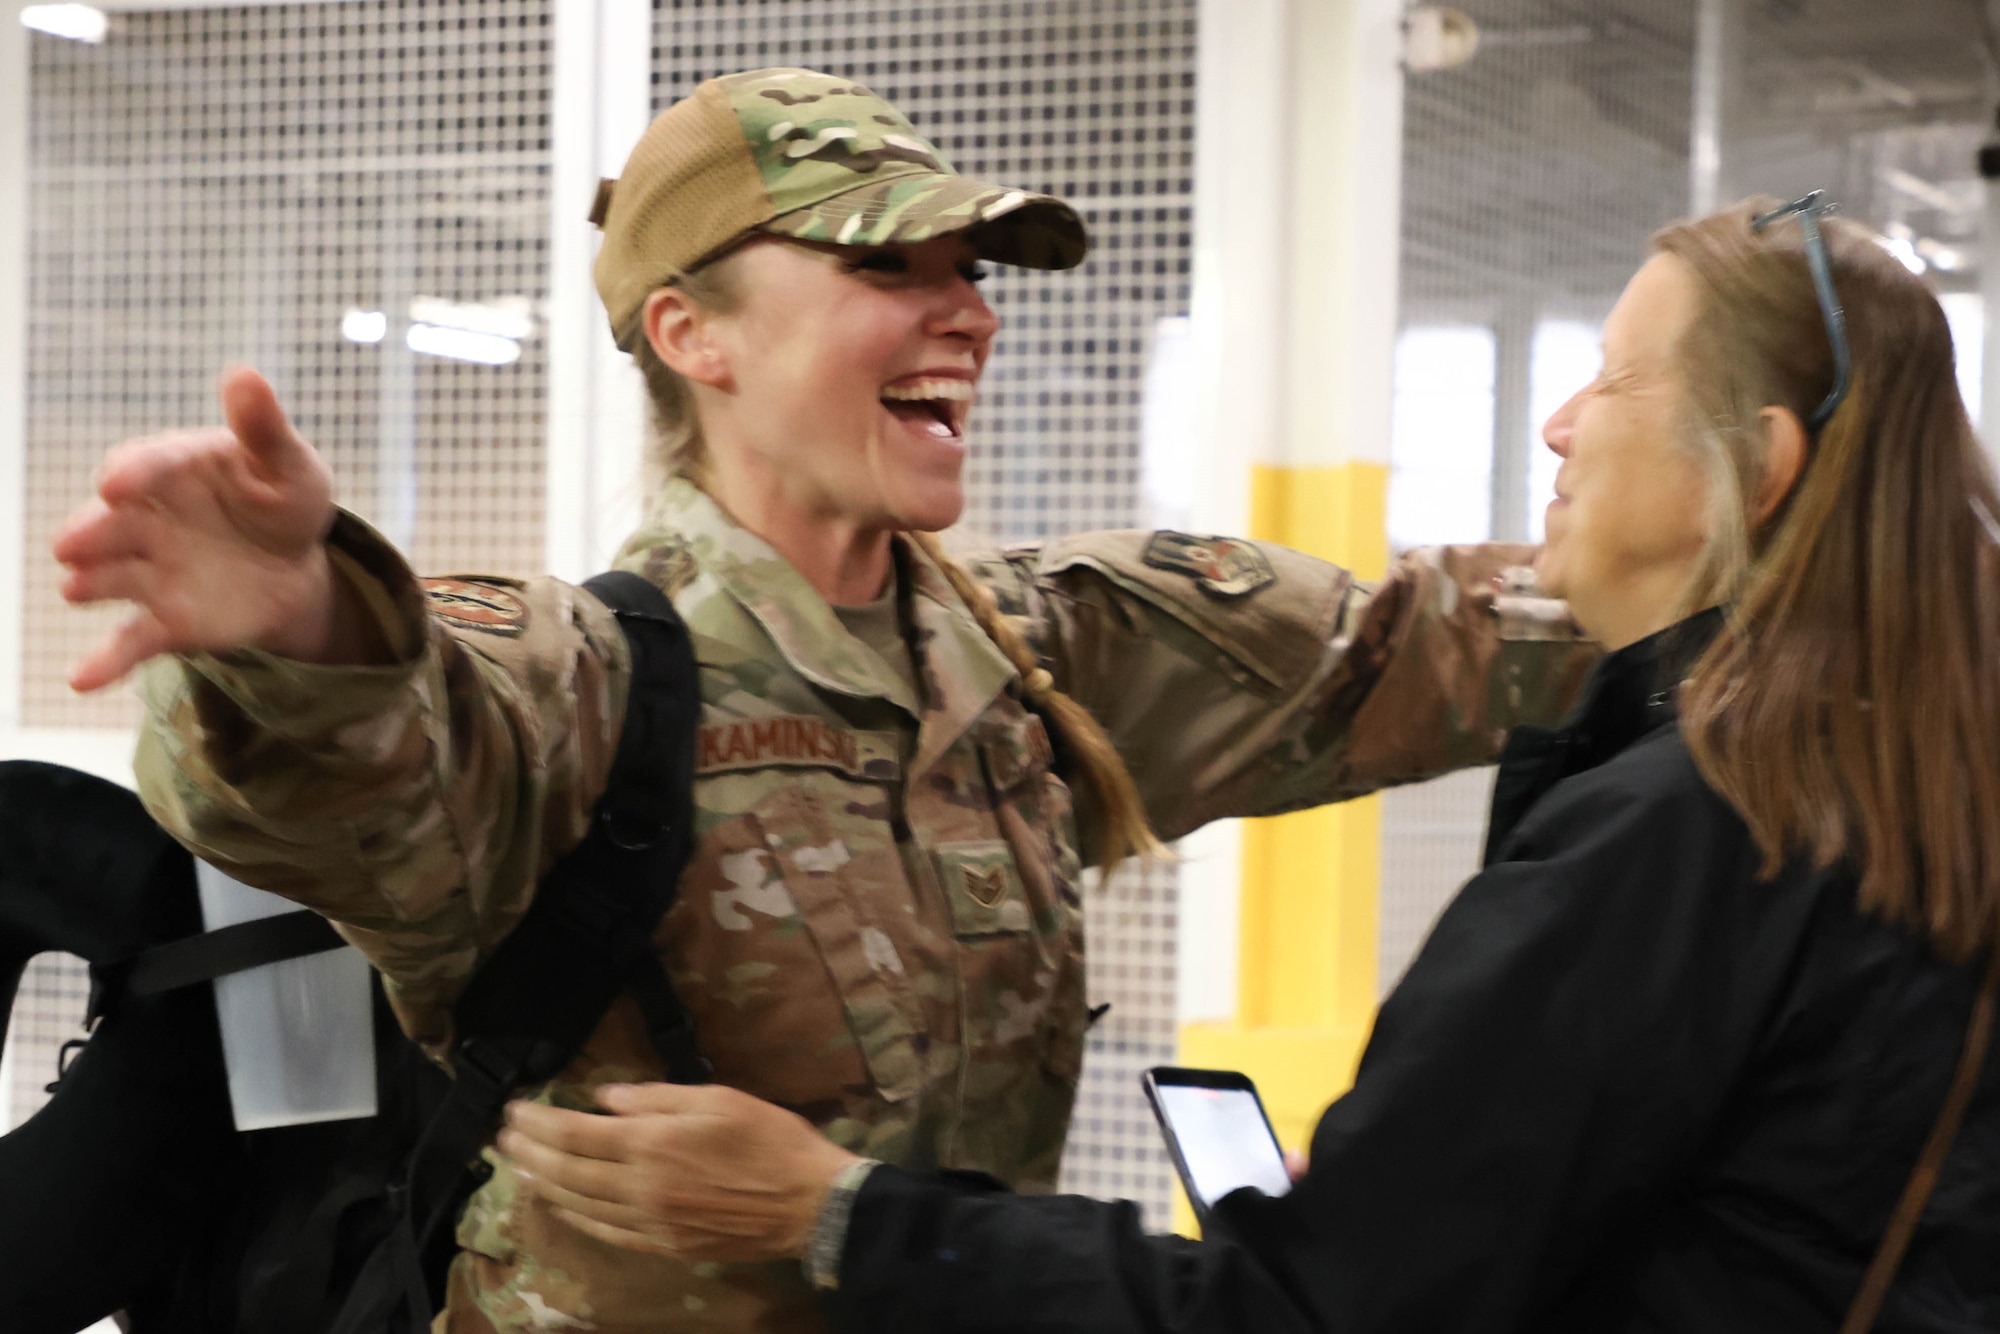 Airman greets relative with a big smile upon returning from deployment.